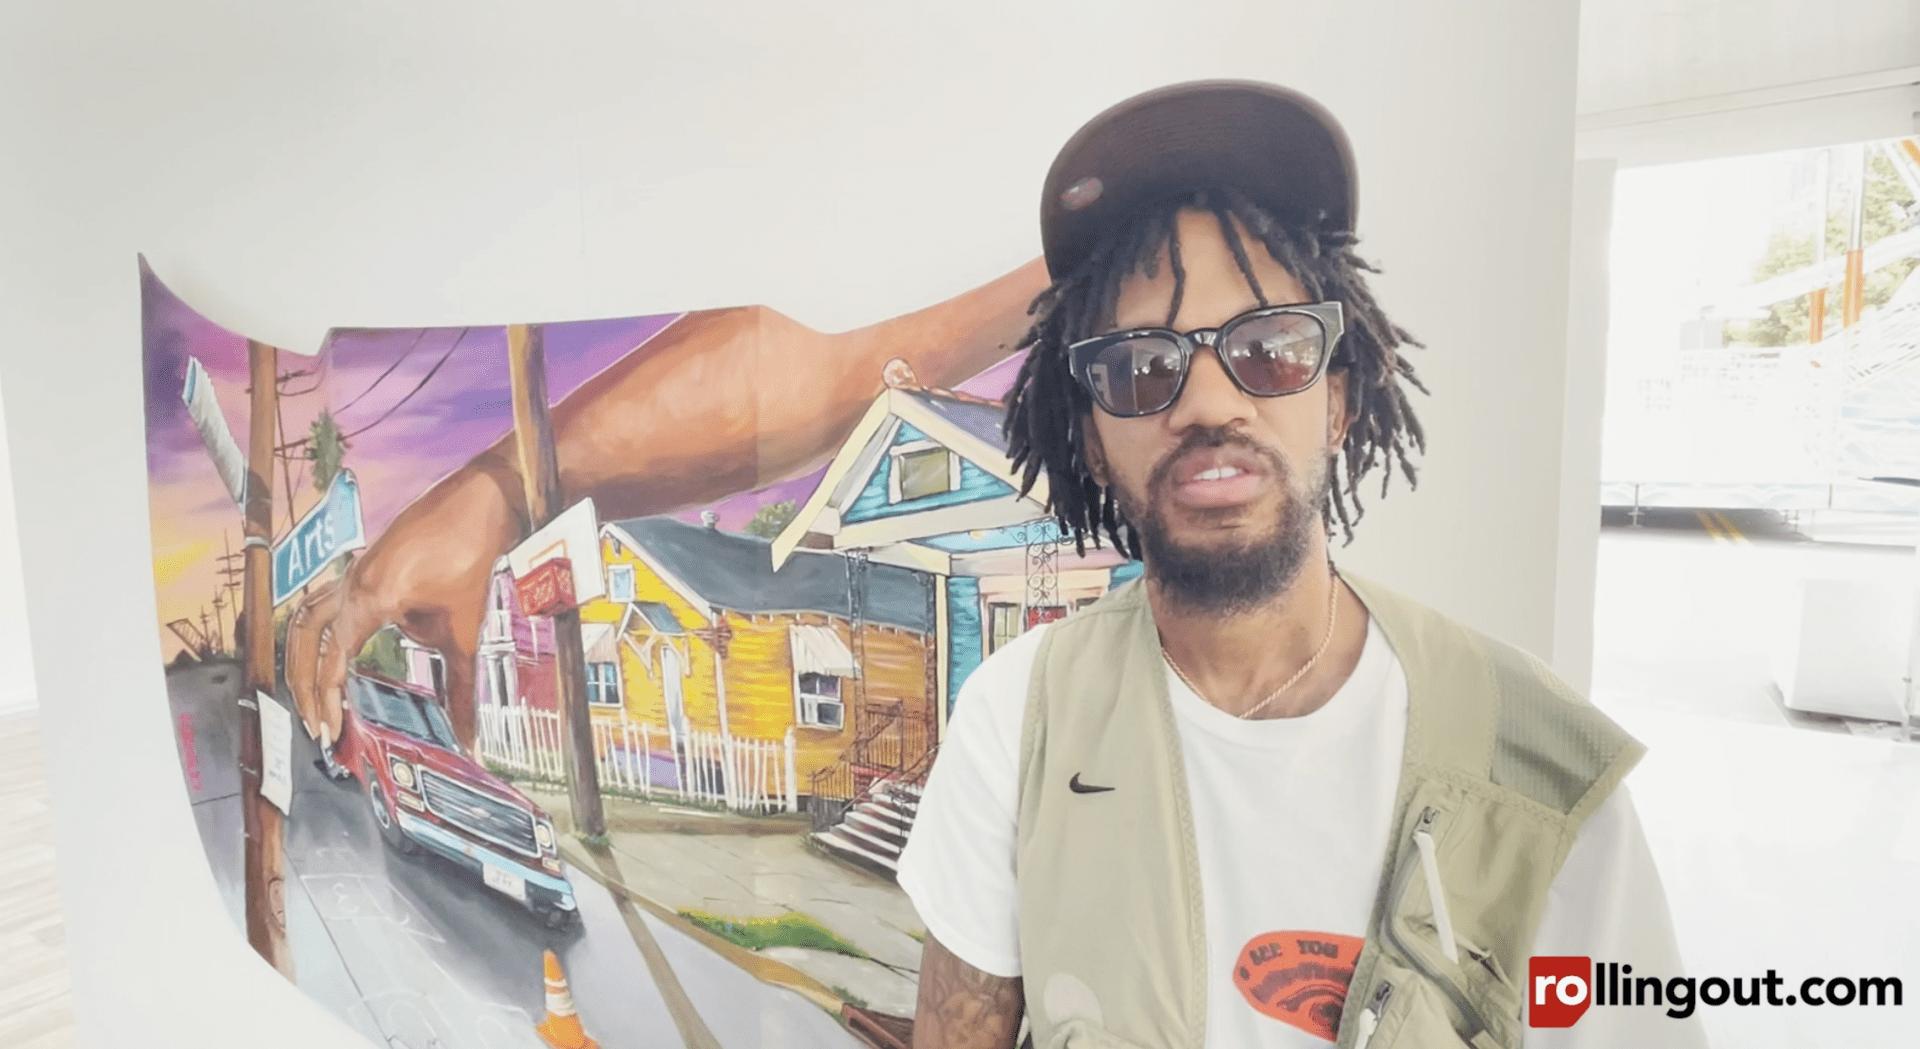 New Orleans artist Jerk Beasley shows love to his city in painting